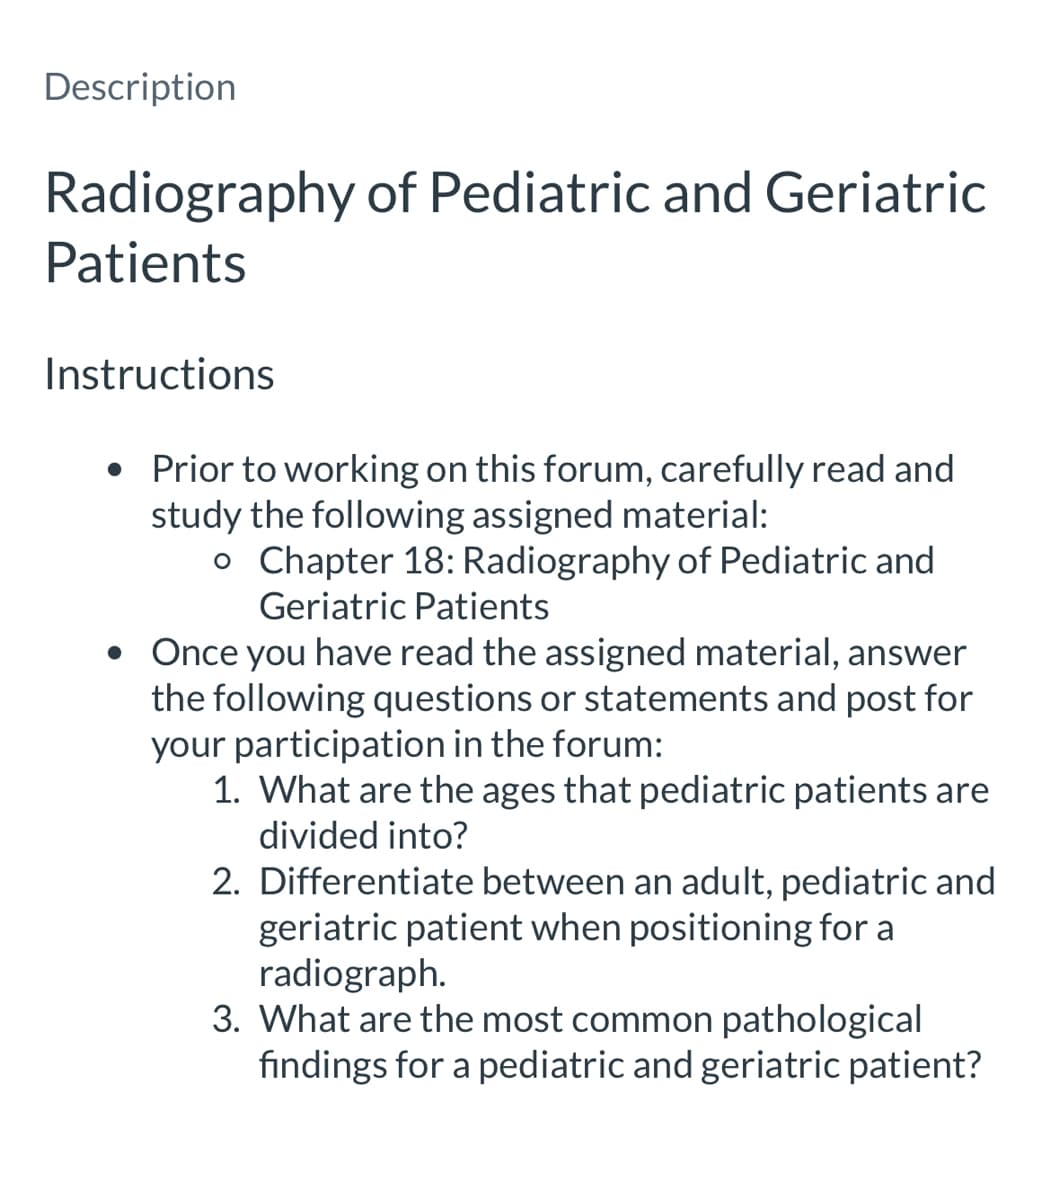 Description
Radiography of Pediatric and Geriatric
Patients
Instructions
• Prior to working on this forum, carefully read and
study the following assigned material:
o Chapter 18: Radiography of Pediatric and
Geriatric Patients
• Once you have read the assigned material, answer
the following questions or statements and post for
your participation in the forum:
1. What are the ages that pediatric patients are
divided into?
2. Differentiate between an adult, pediatric and
geriatric patient when positioning for a
radiograph.
3. What are the most common pathological
findings for a pediatric and geriatric patient?